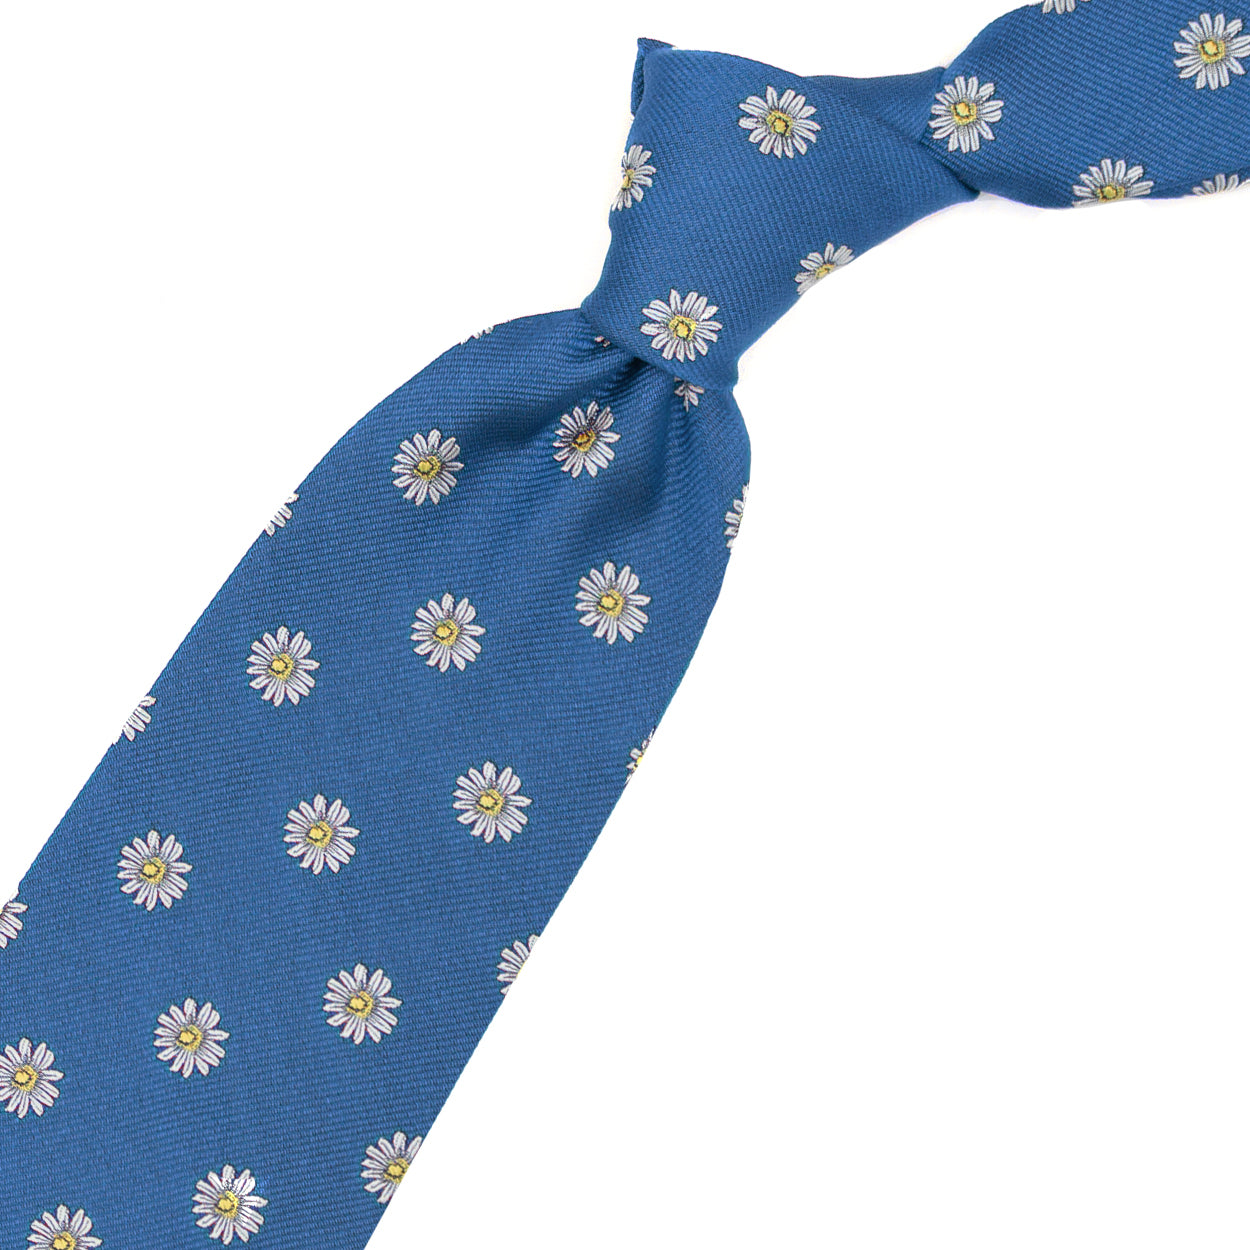 Blue tie with daisies